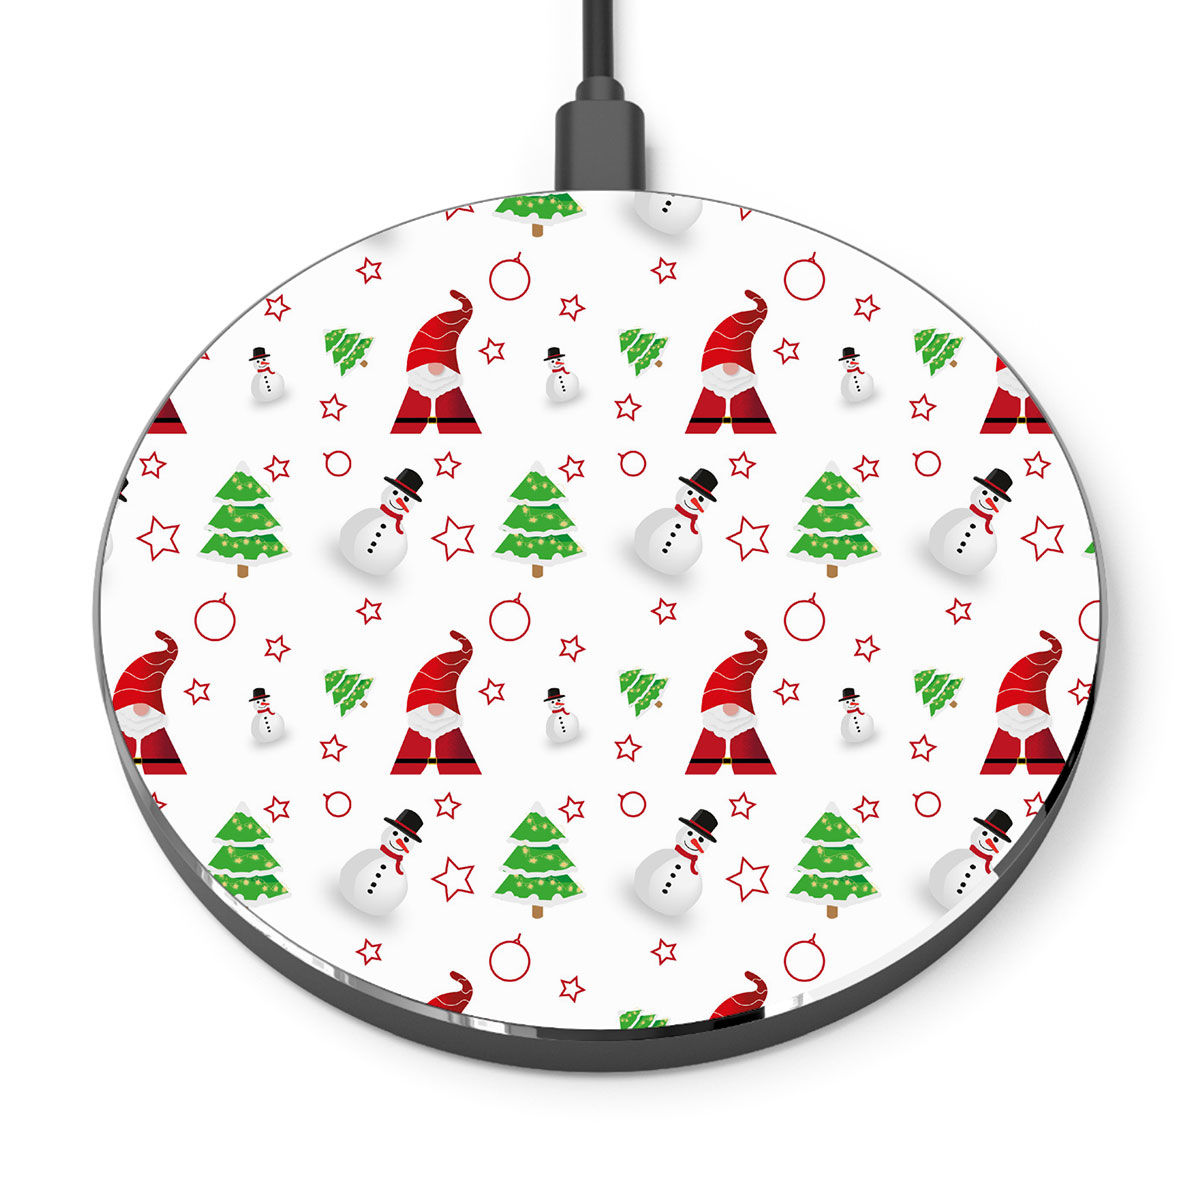 Santa Claus, Snowman Clipart And Pine Tree Silhouette Seamless Pattern Printed Wireless Charger